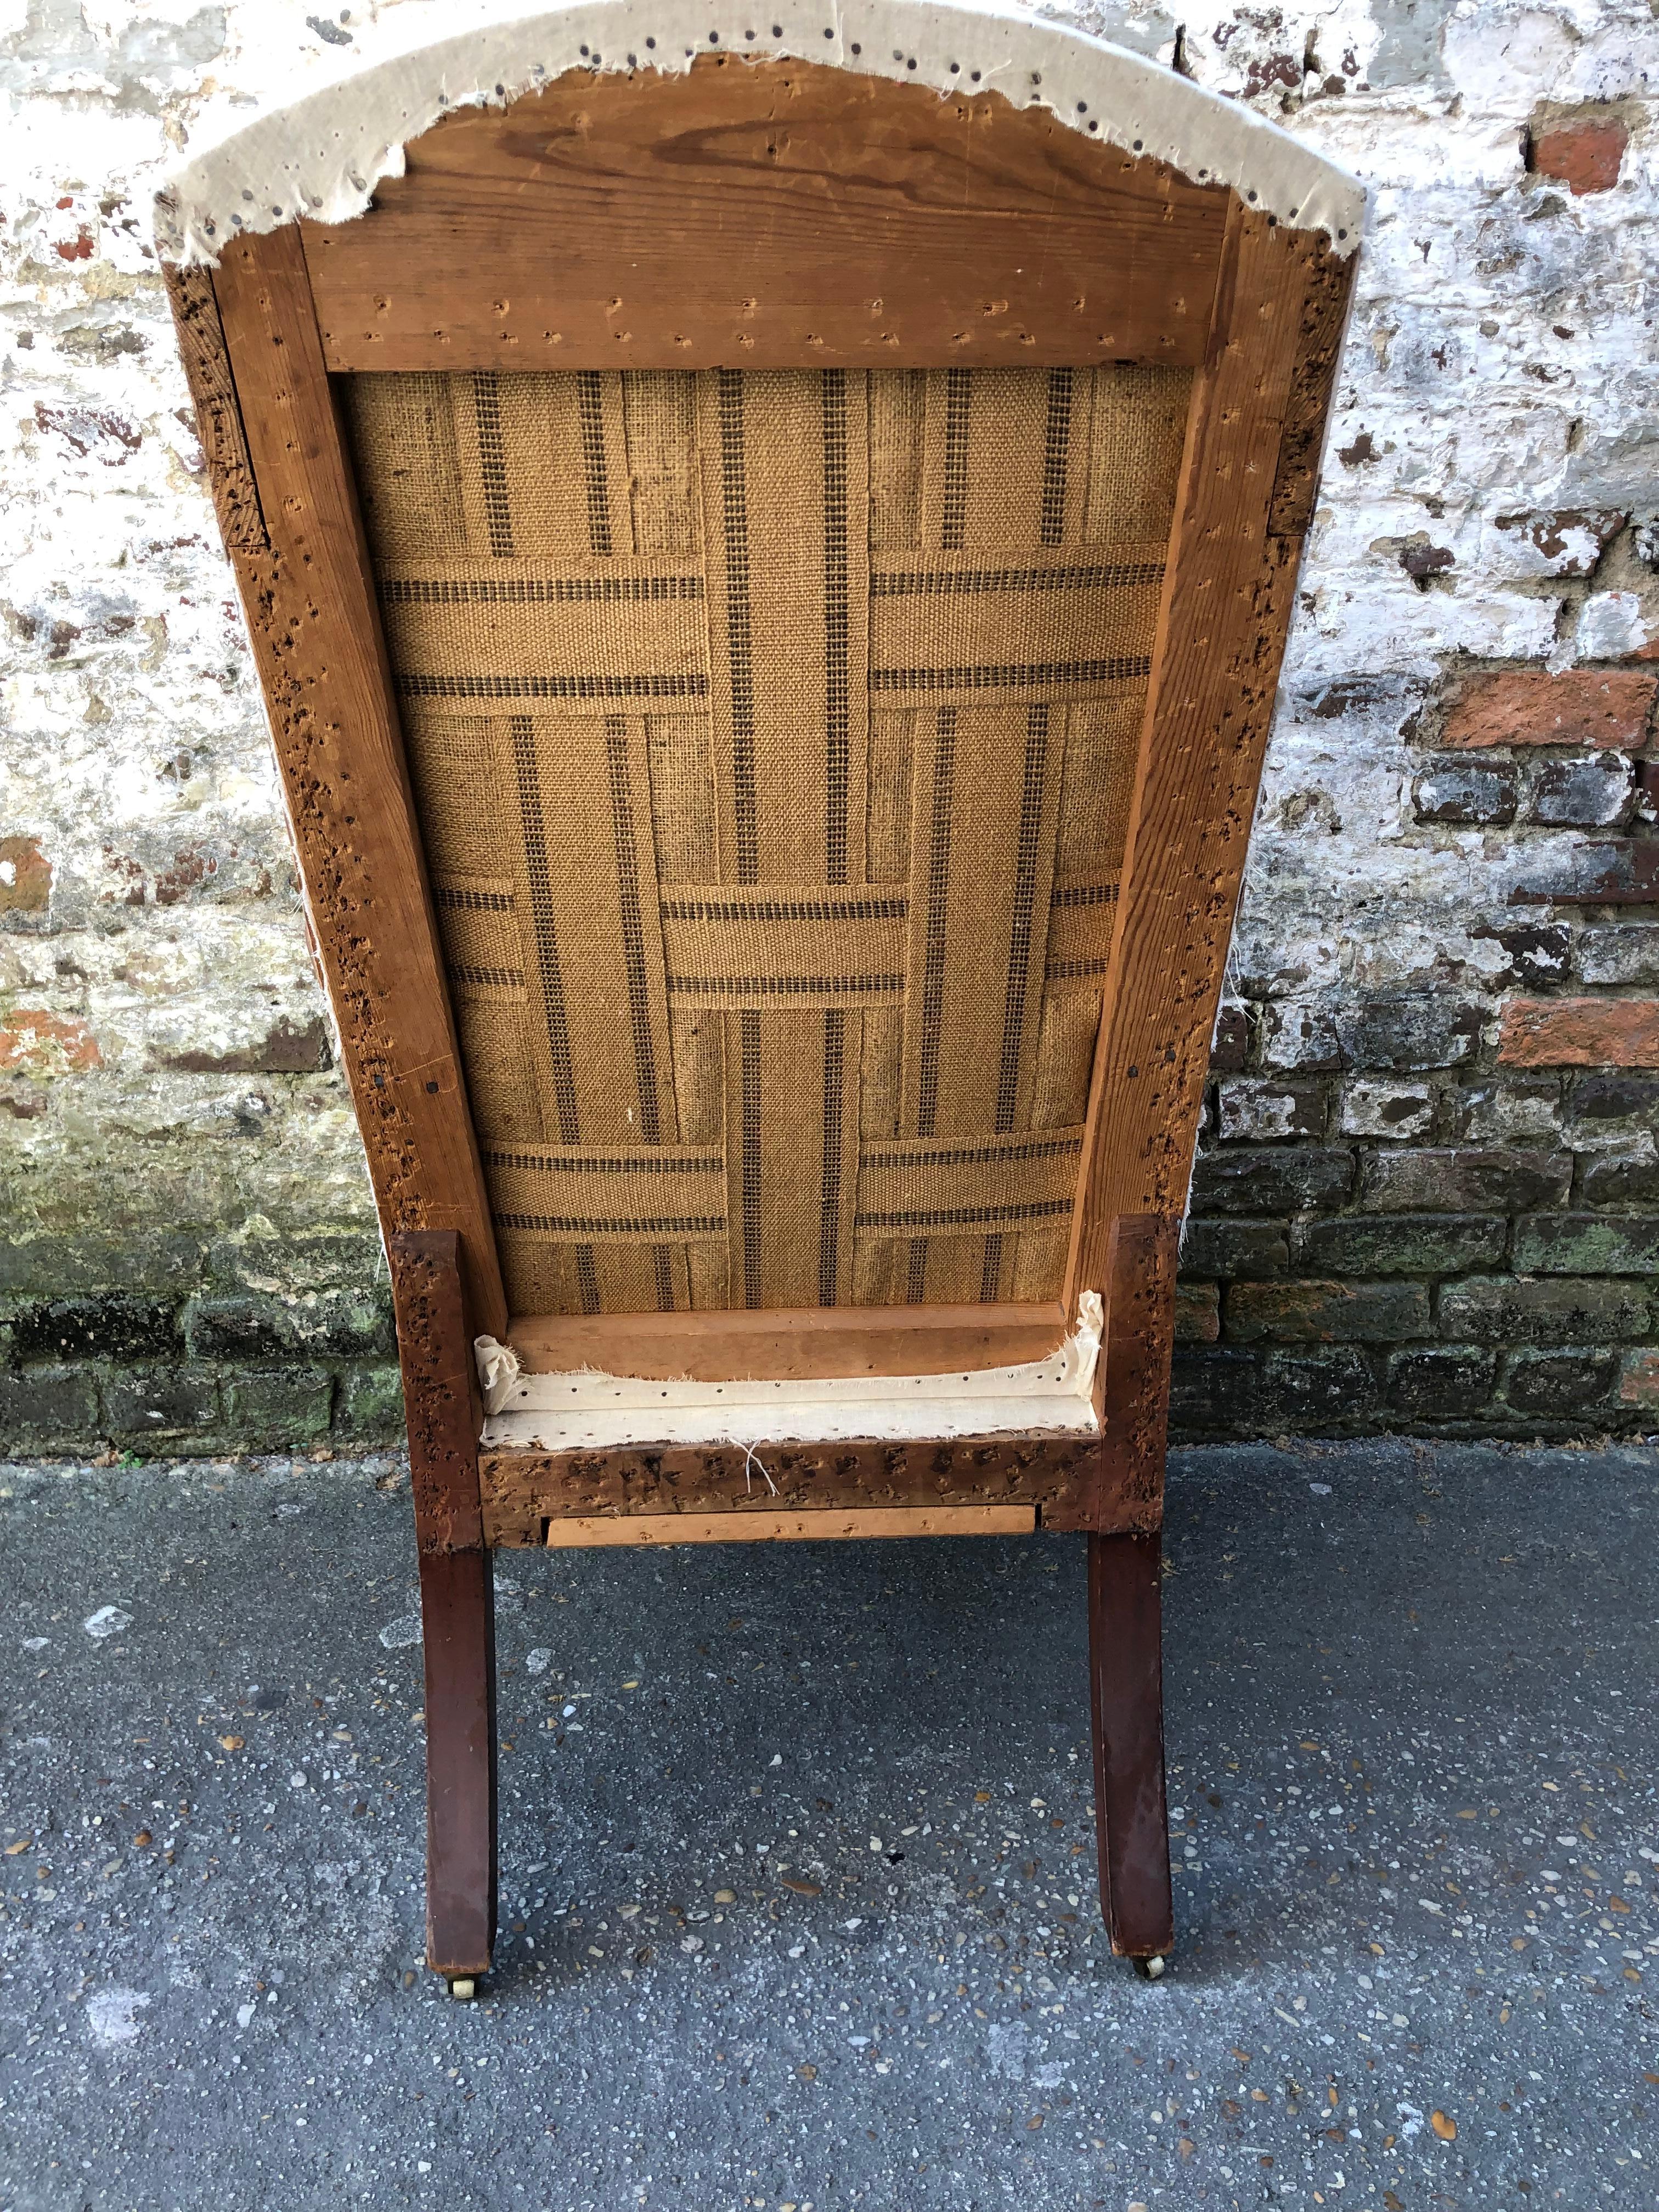 Early 19th Century American Southern Wing Back Chair with Mahogany Turned Legs, circa 1810